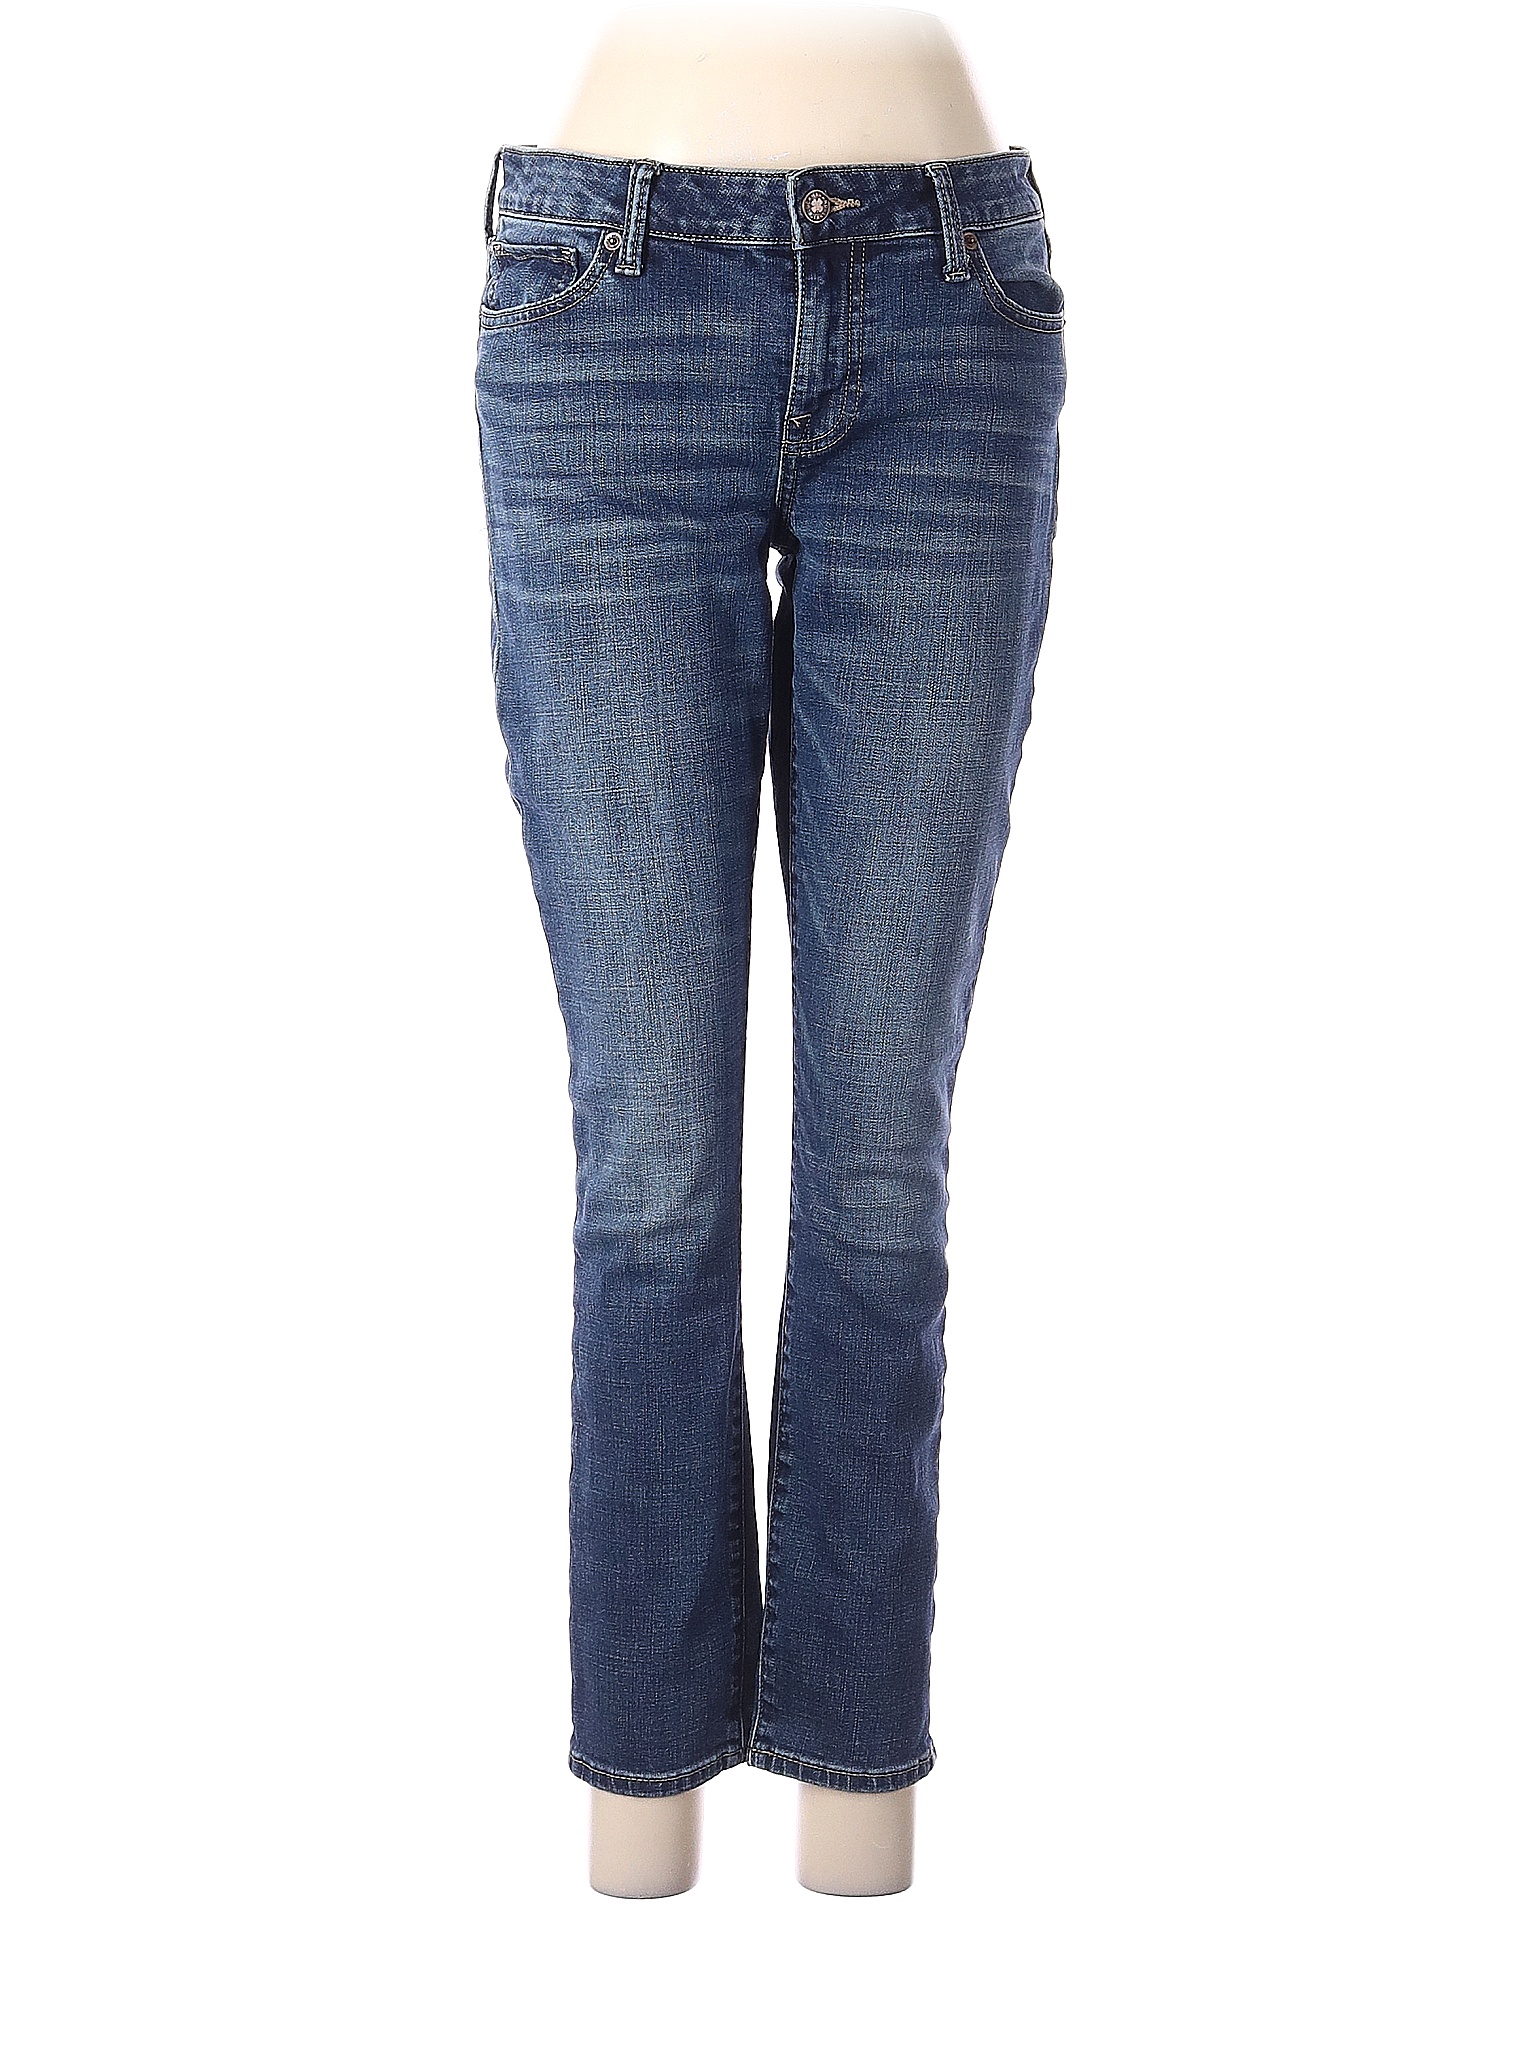 Women's Bootcut Jeans: New & Used On Sale Up To 90% Off | thredUP